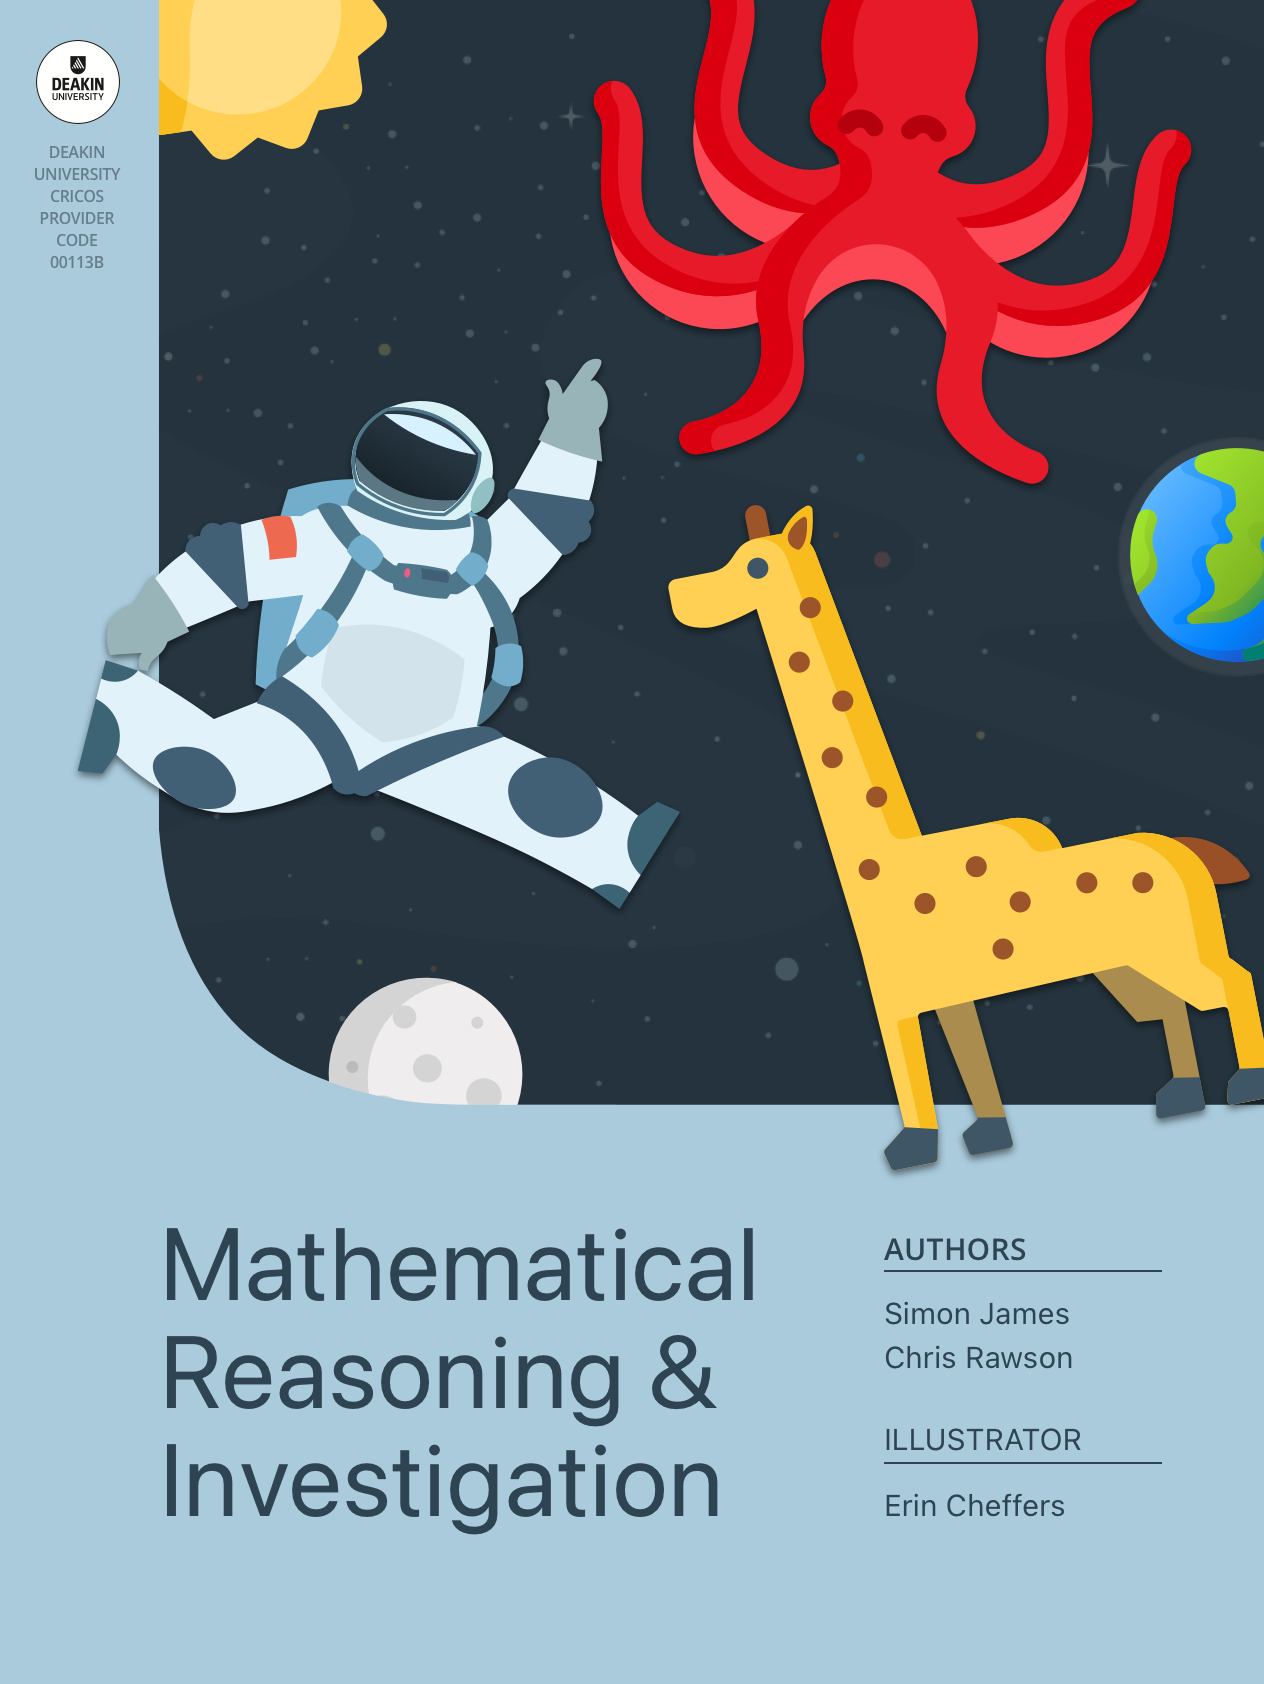 Book cover - mathematical reasoning and investigate by Simon James, Chris Rawson and illustrated by Erin Cheffers